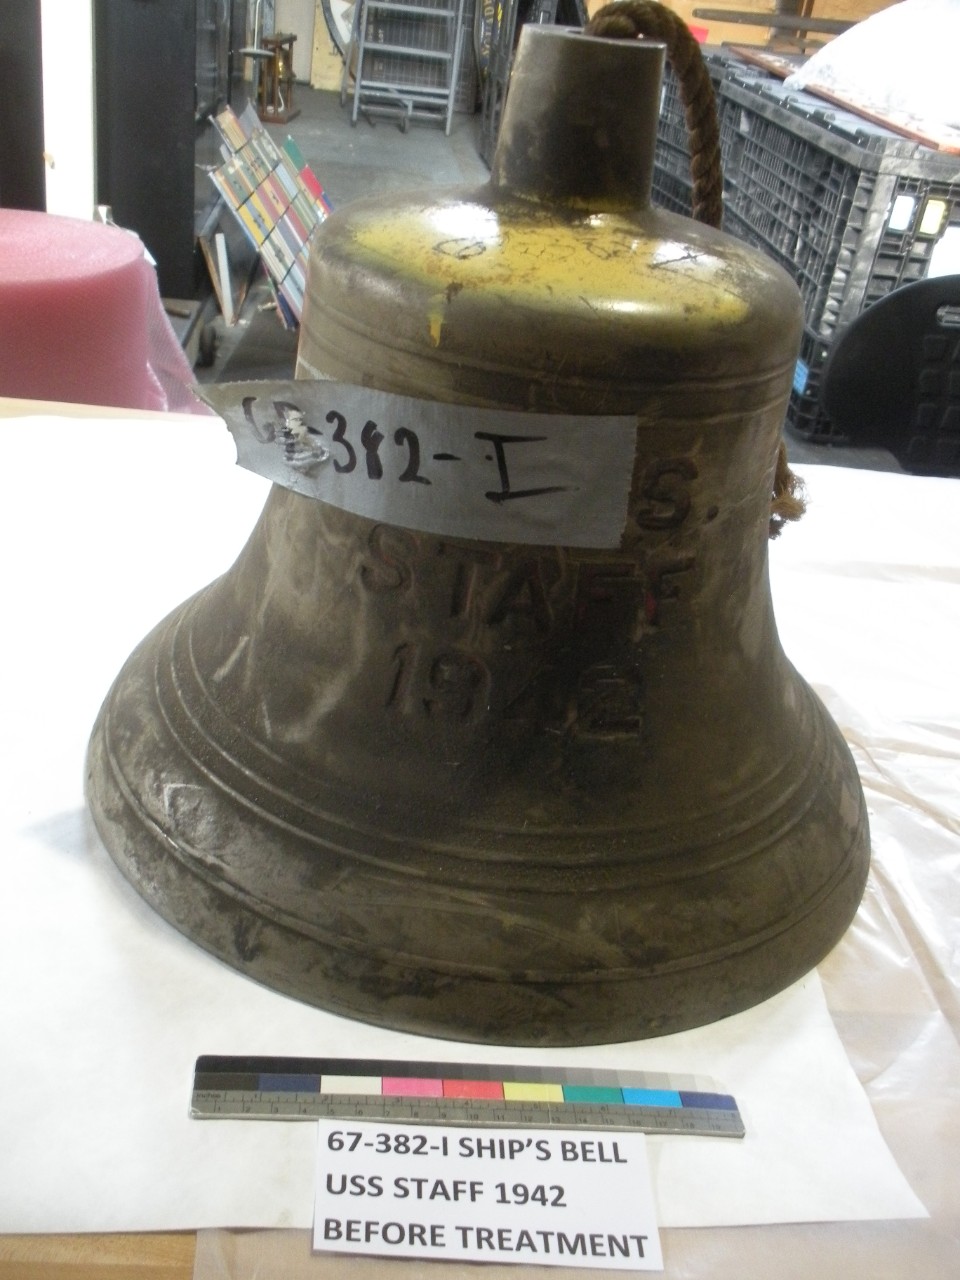 Ship's bell from USS Staff. Bell is covered in dust and has a piece of duct tape attached to it.  